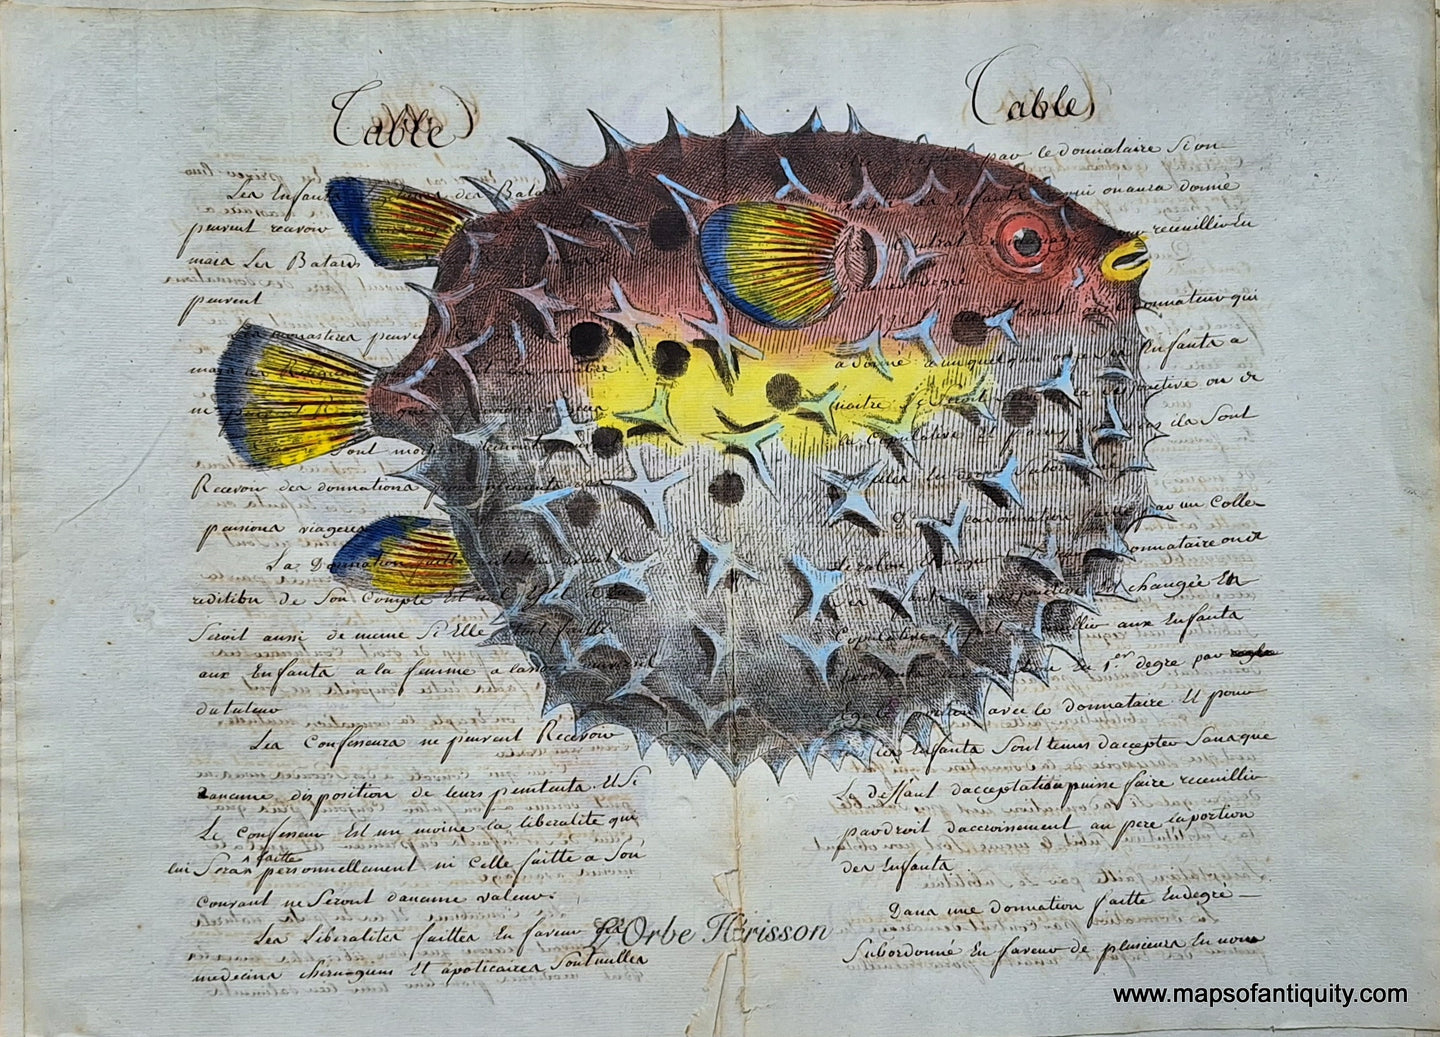 Colorful red, yellow, blue Digitally-Engraved-Specialty-Reproductions-Print-Prints-Antique-Ledger-Paper-L'Orbe-Herisson-Puffer-Fish-Fishing-Maps-of-Antiquity